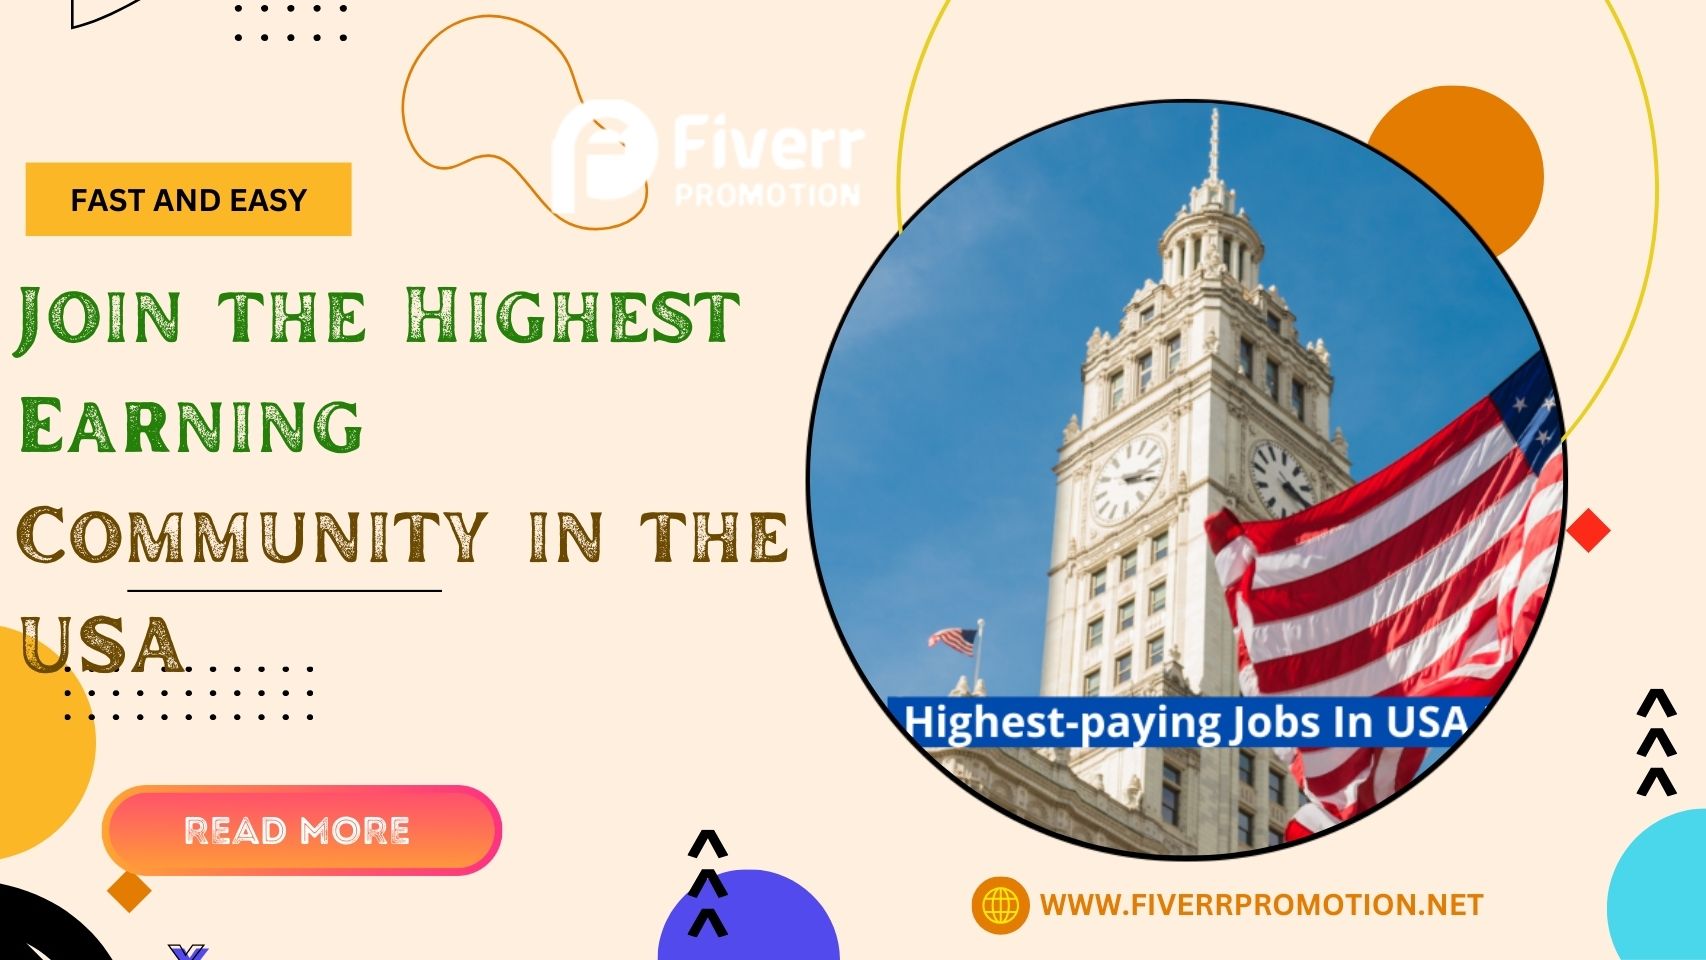 Fast and Easy: Join the Highest Earning Community in the USA